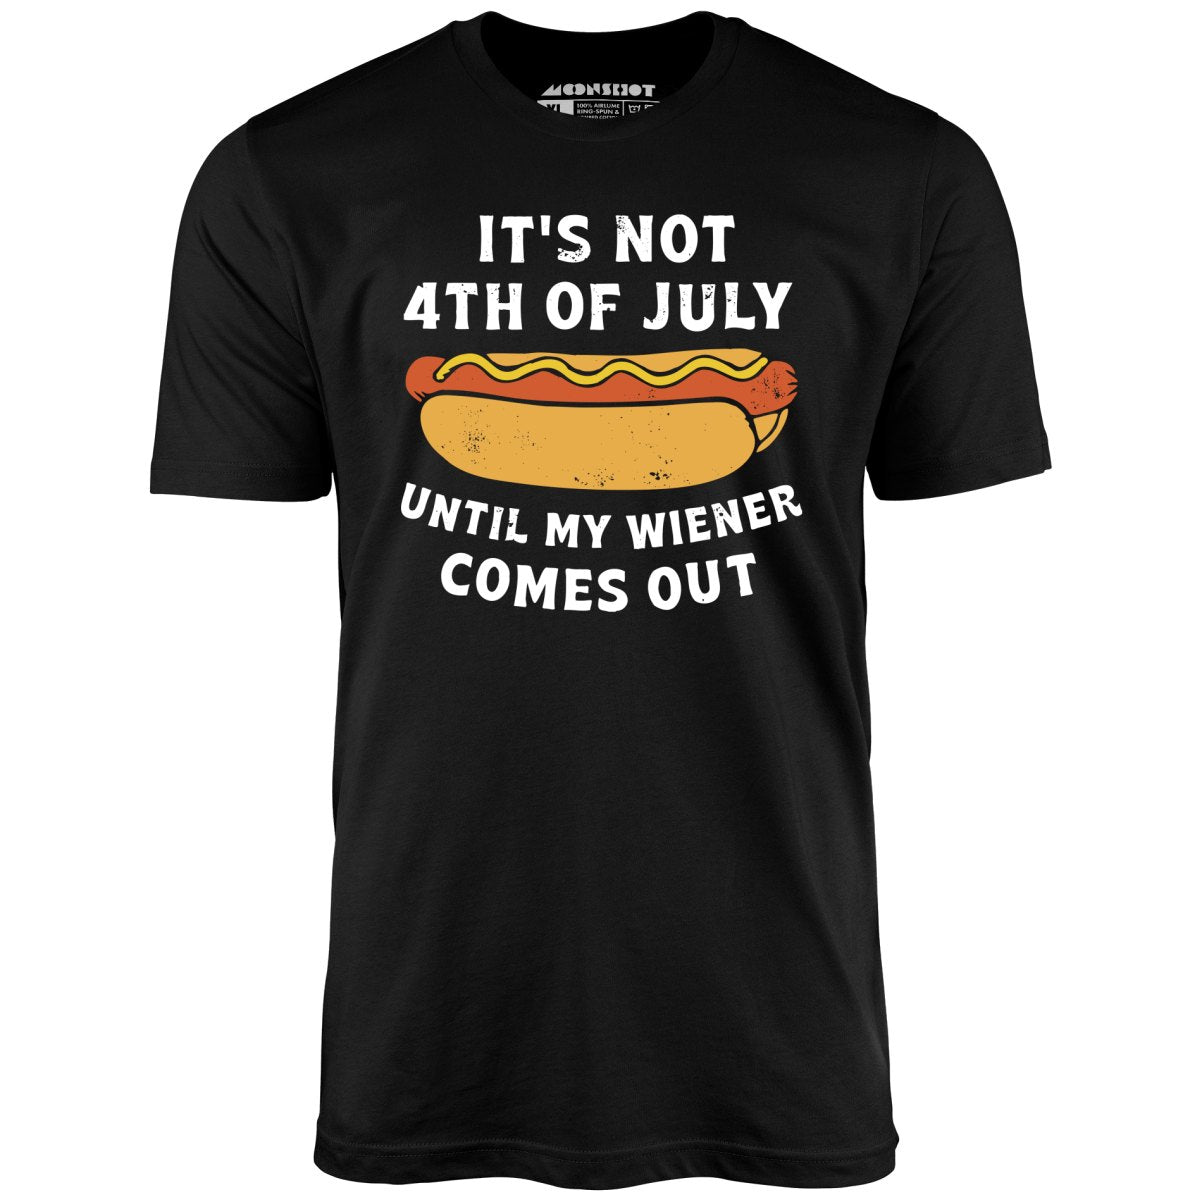 It's Not 4th of July Until My Wiener Comes Out - Unisex T-Shirt